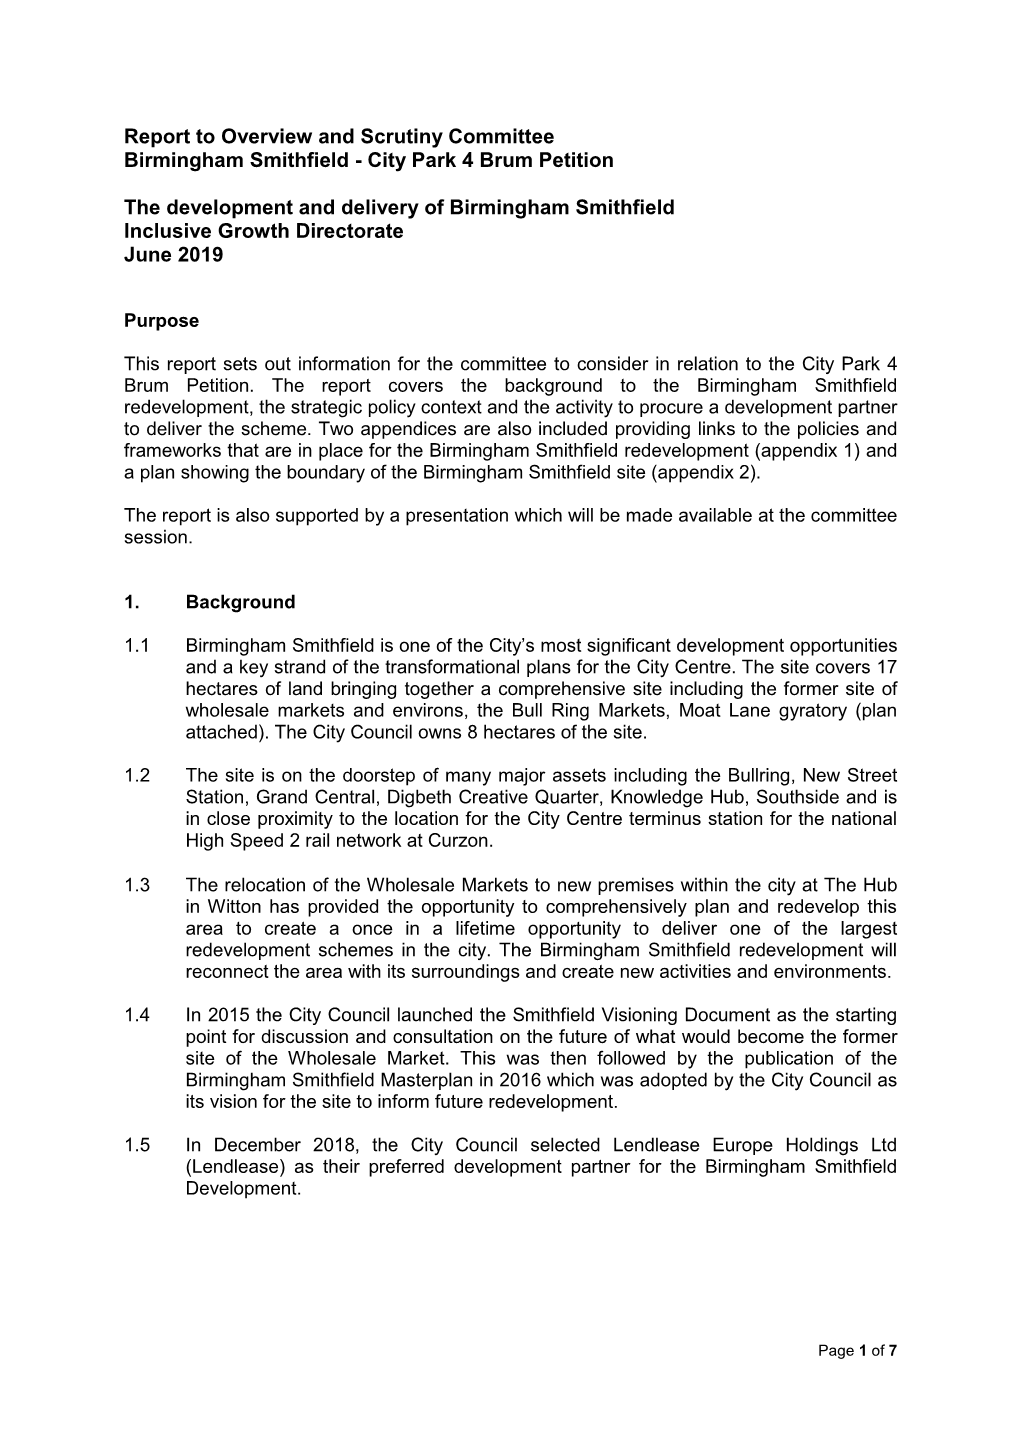 Report to Overview and Scrutiny Committee Birmingham Smithfield - City Park 4 Brum Petition